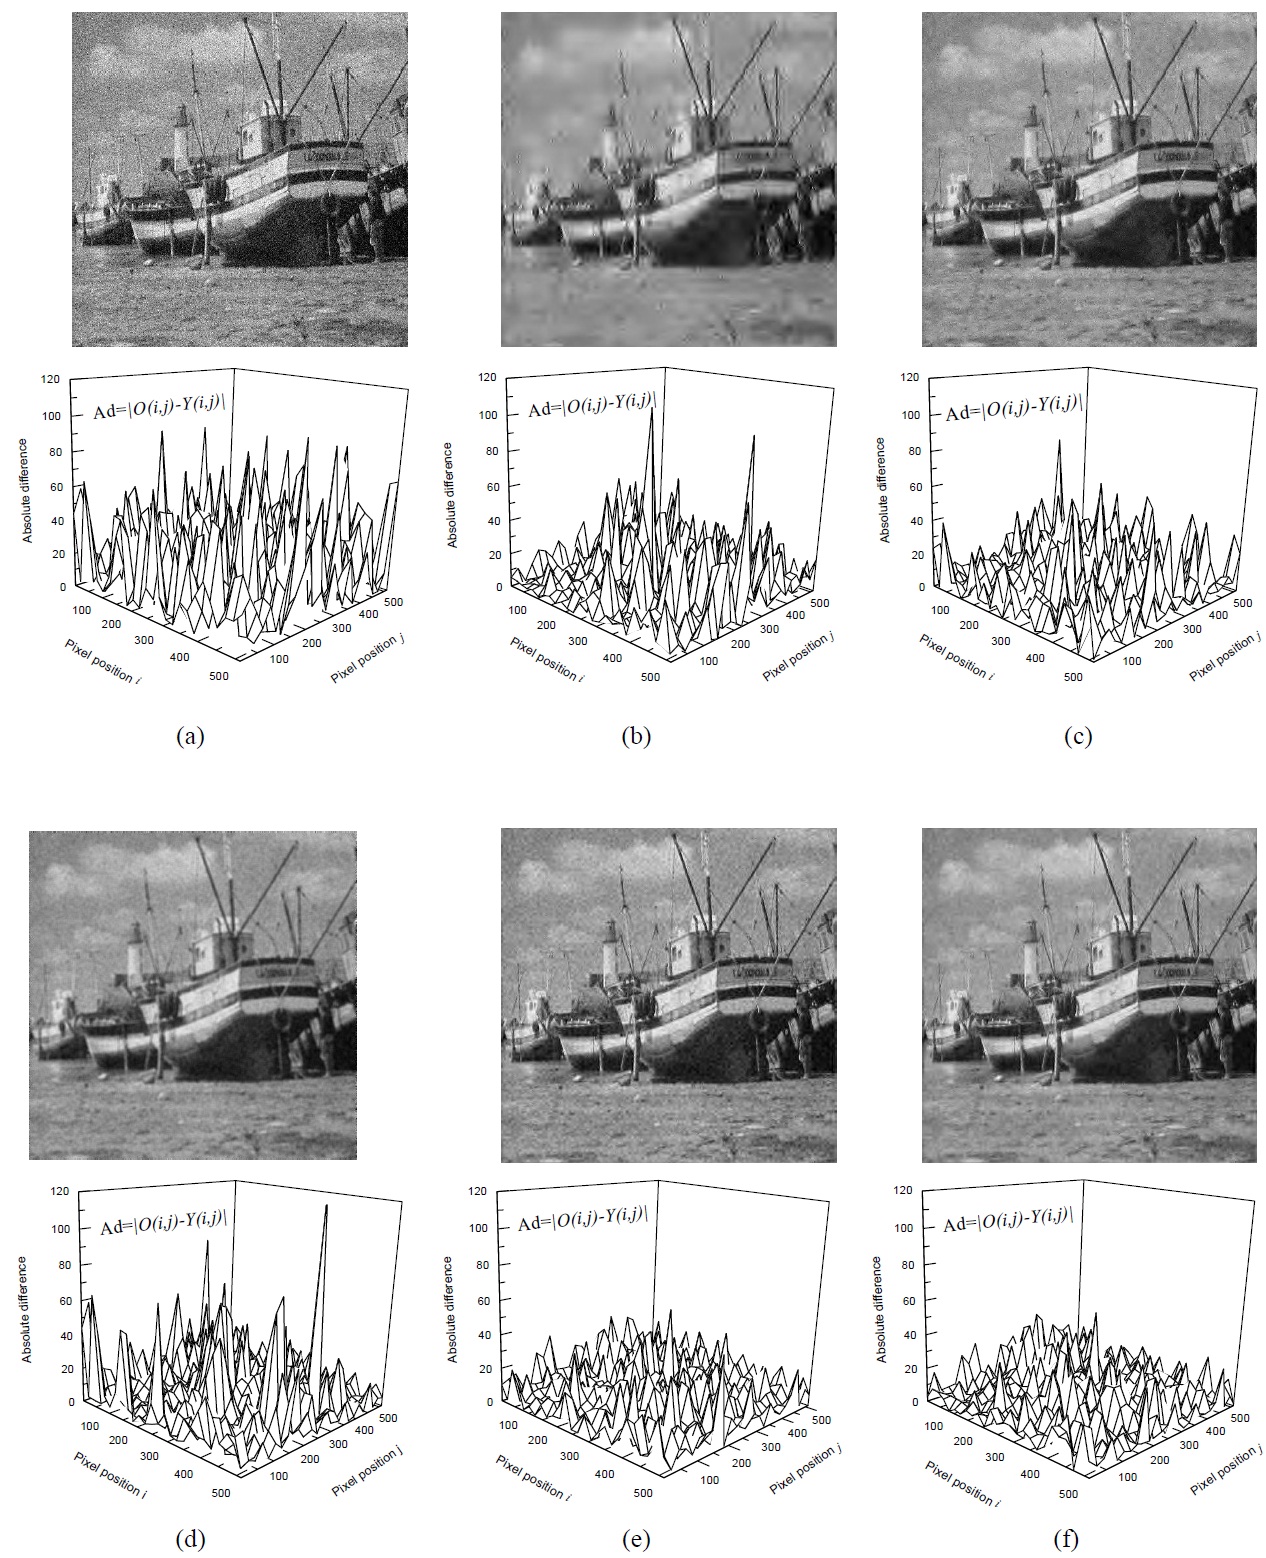 Comparing the results of various denoising methods, for boat corrupted by noise σ=30. (a) Noisy image, (b) VisuShrink, (c) SureShrink, (d) Mean filter, (e) BiShrink, (f) proposed method.